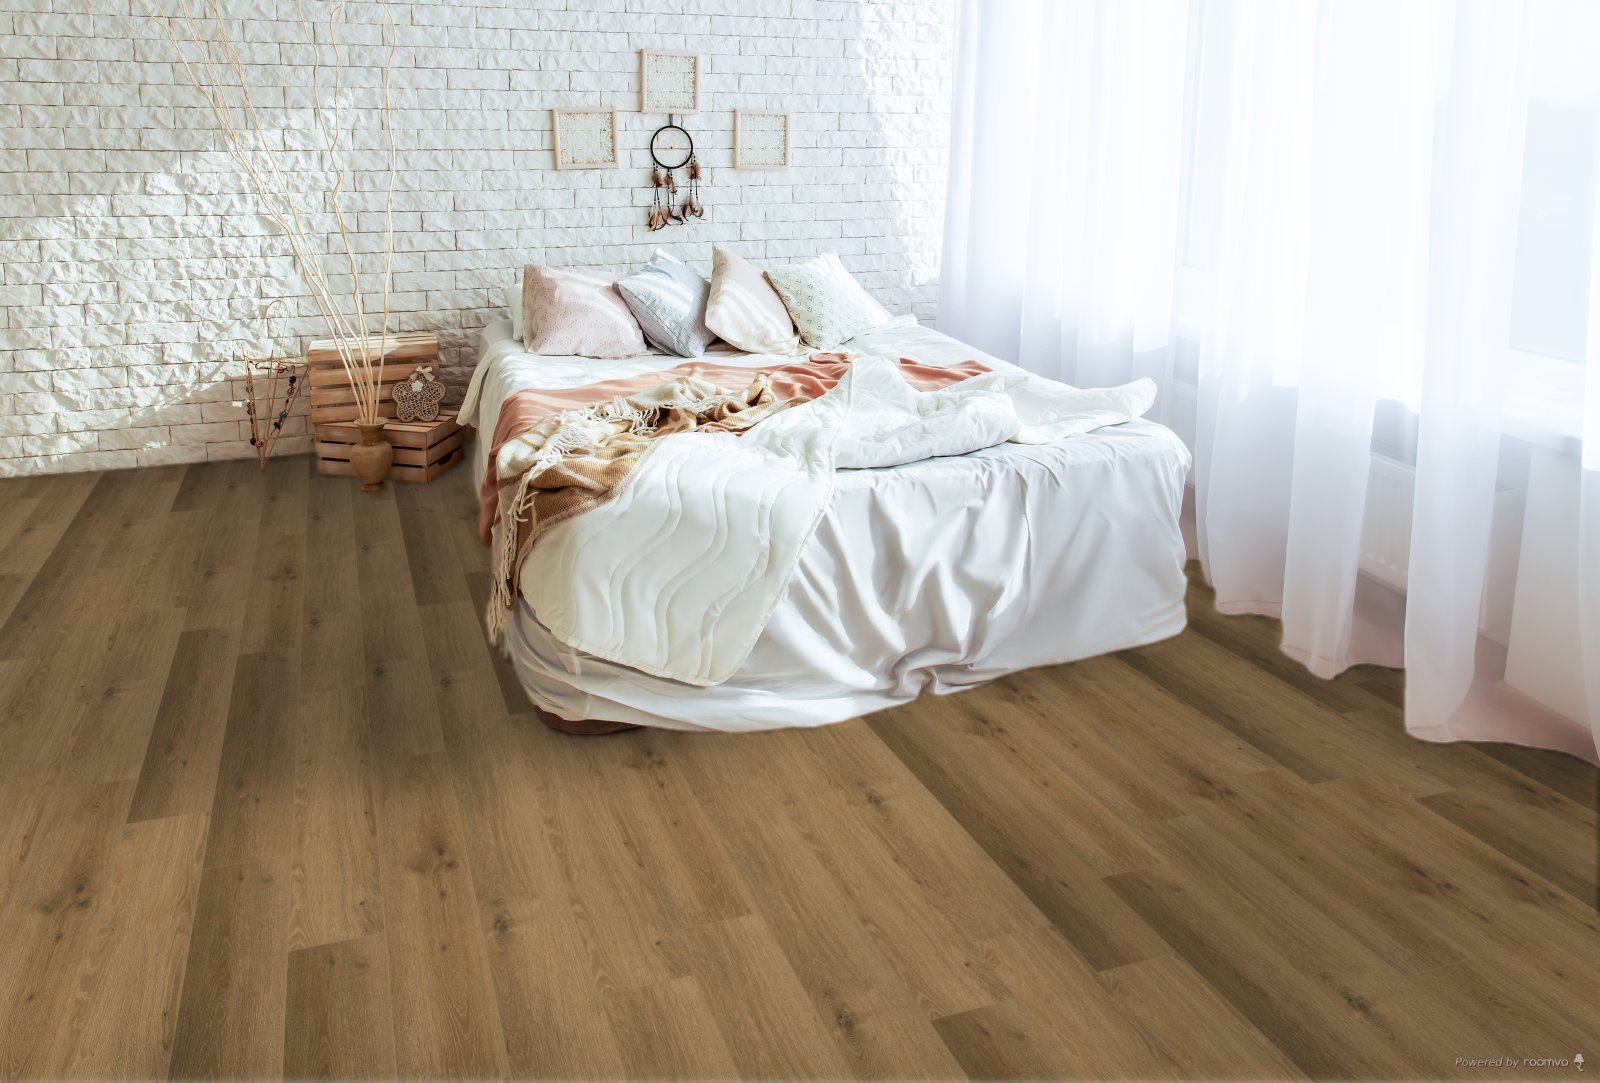 Horizen Flooring presents to you a picture of a quality wide plank Camelthorne luxury vinyl plank. NovoCore Premium EIR collection features a wide range of colors & designs that will compliment any interior. Natural wood grain synchronized surface allow for an authentic hardwood look & feel. This collection features a 0.25″ / 6.5 mm overall thickness and a durable 22 mil / 0.55 mm wear layer for residential and commercial applications.